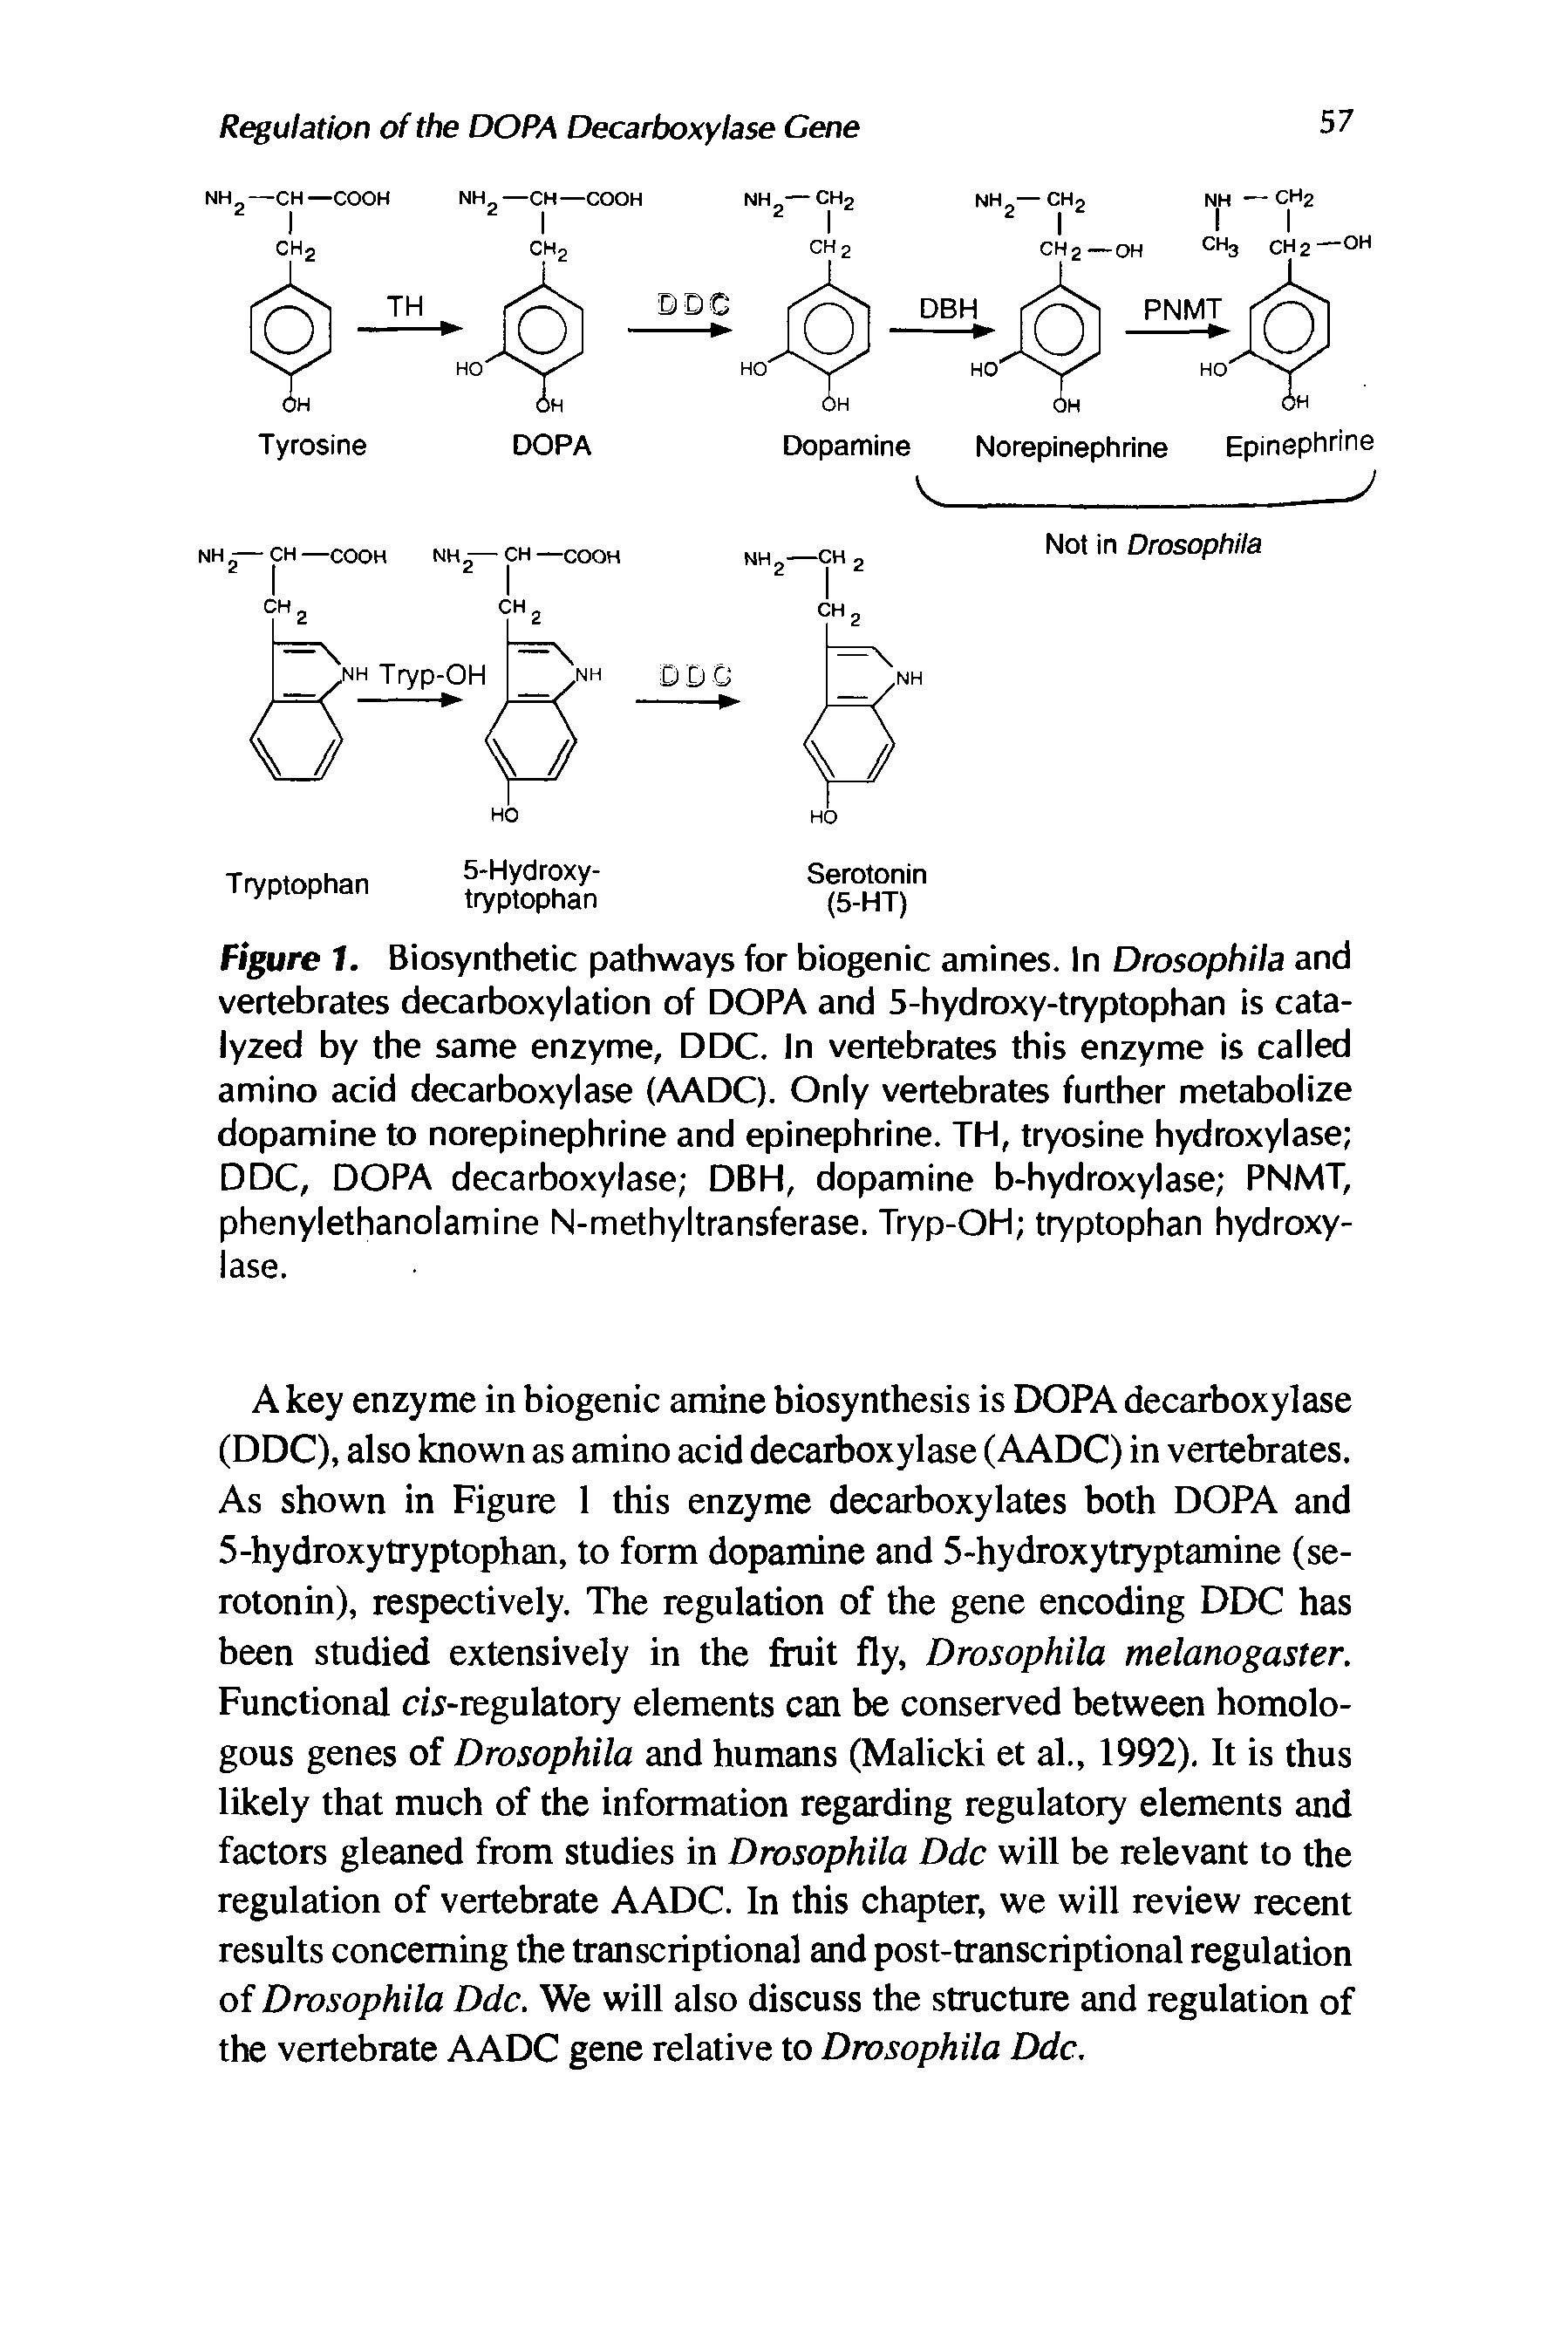 Figure 1. Biosynthetic pathways for biogenic amines. In Drosophila and vertebrates decarboxylation of DOPA and 5-hydroxy-tryptophan is catalyzed by the same enzyme, DDC. In vertebrates this enzyme is called amino acid decarboxylase (AADC). Only vertebrates further metabolize dopamine to norepinephrine and epinephrine. TH, tryosine hydroxylase DDC, DOPA decarboxylase DBH, dopamine b-hydroxylase PNMT, phenylethanolamine N-methyltransferase. Tryp-OH tryptophan hydroxylase.